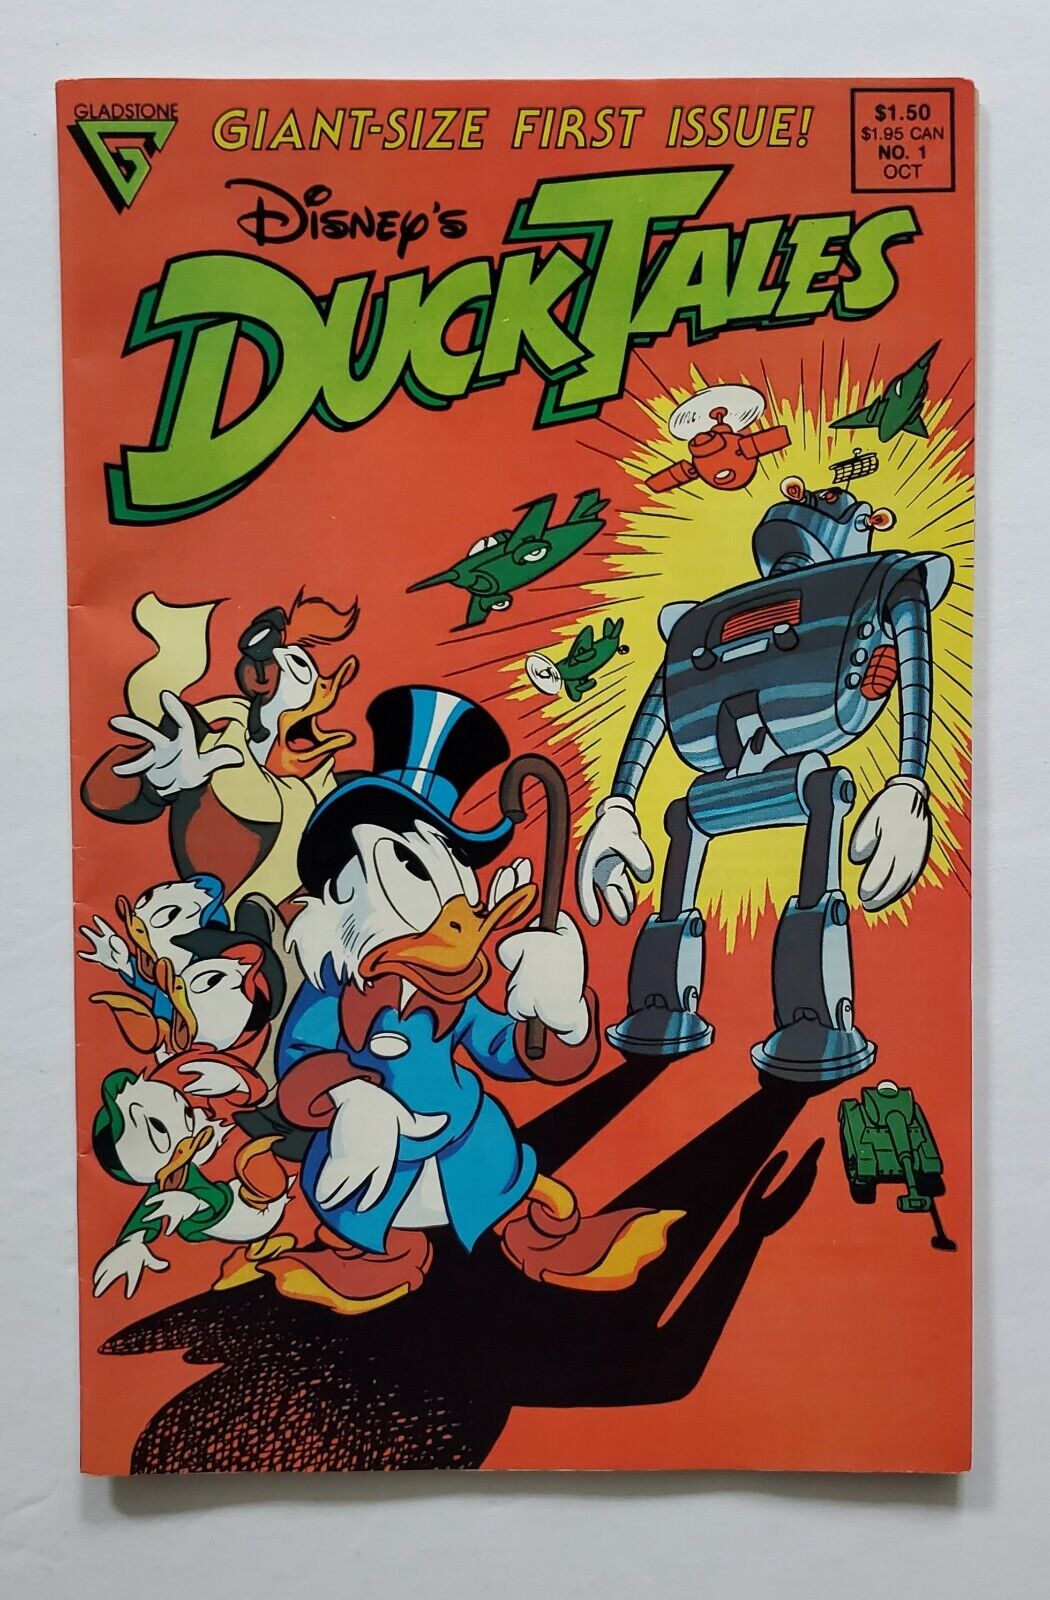 Disneys Duck Tales #1 (1988) Gladstone Giant Sized Scrooge Launchpad 